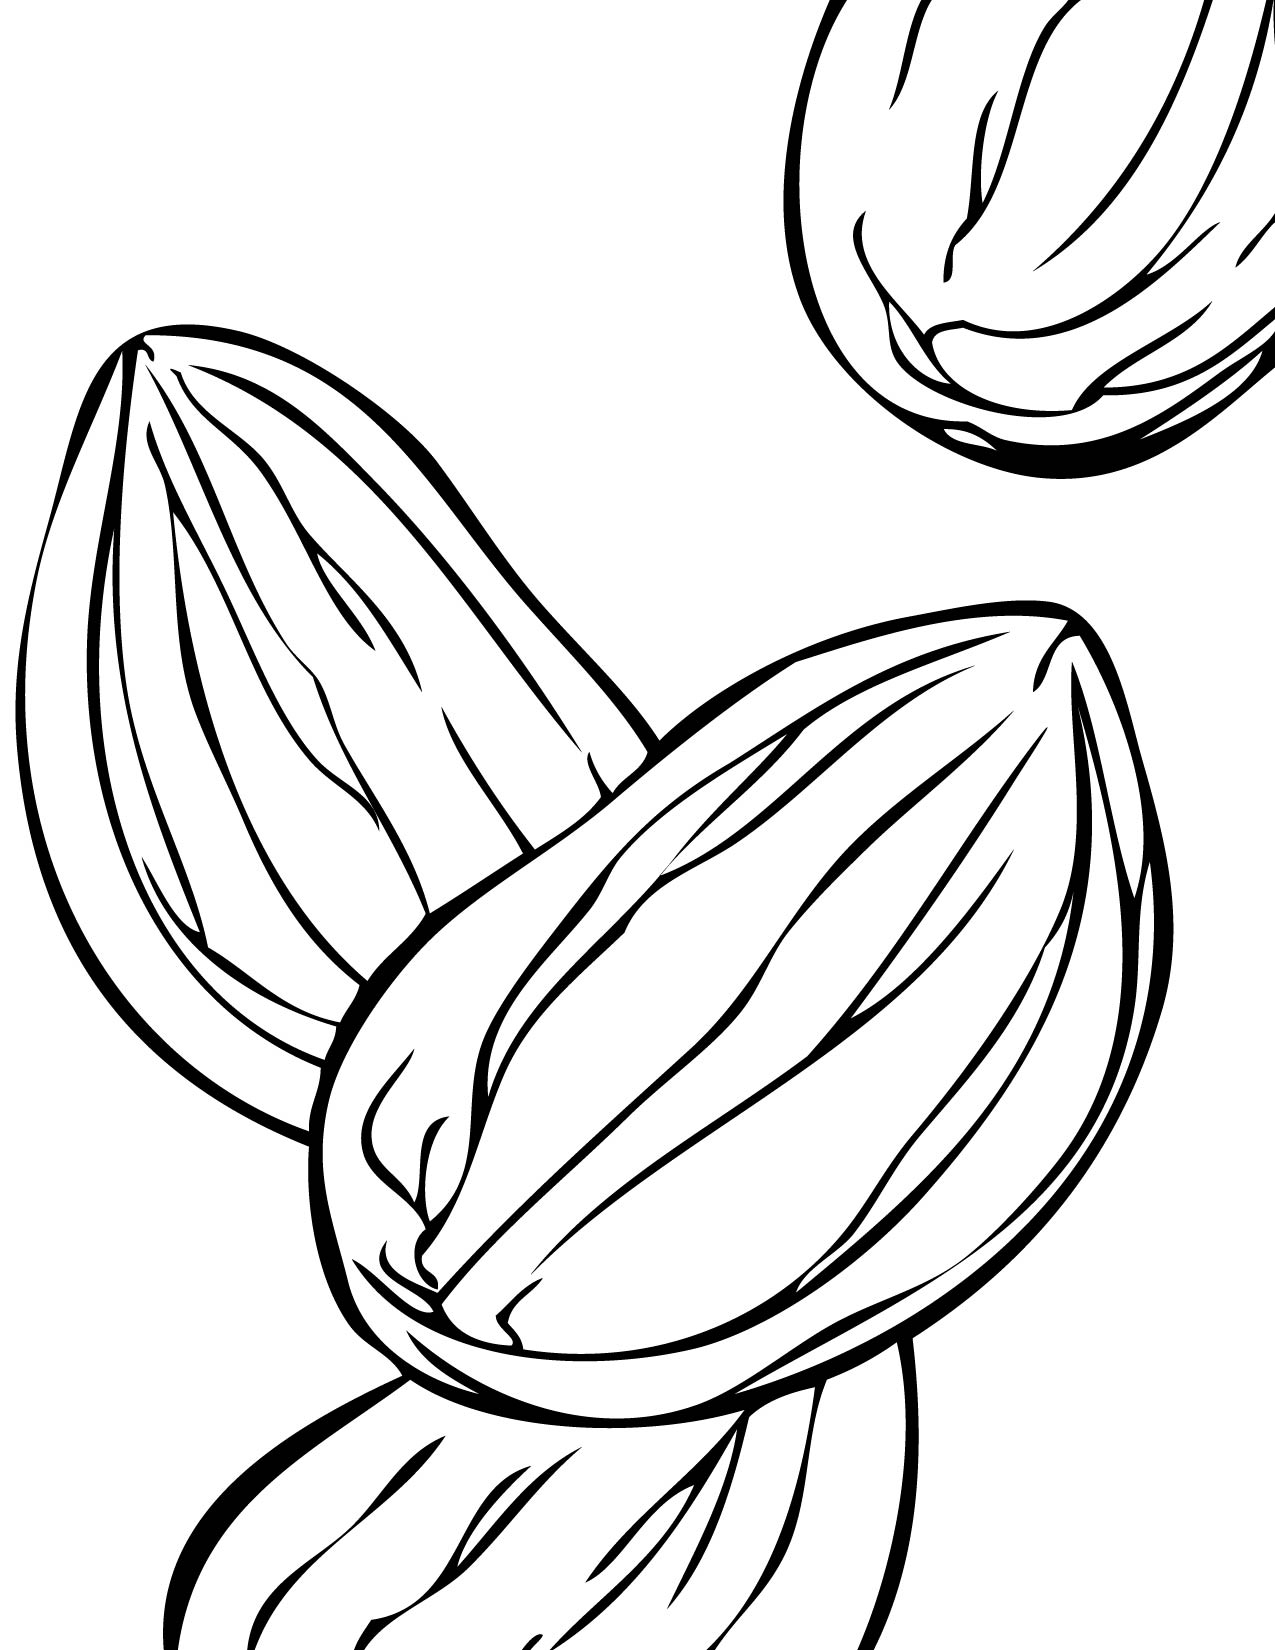 Almond coloring #11, Download drawings